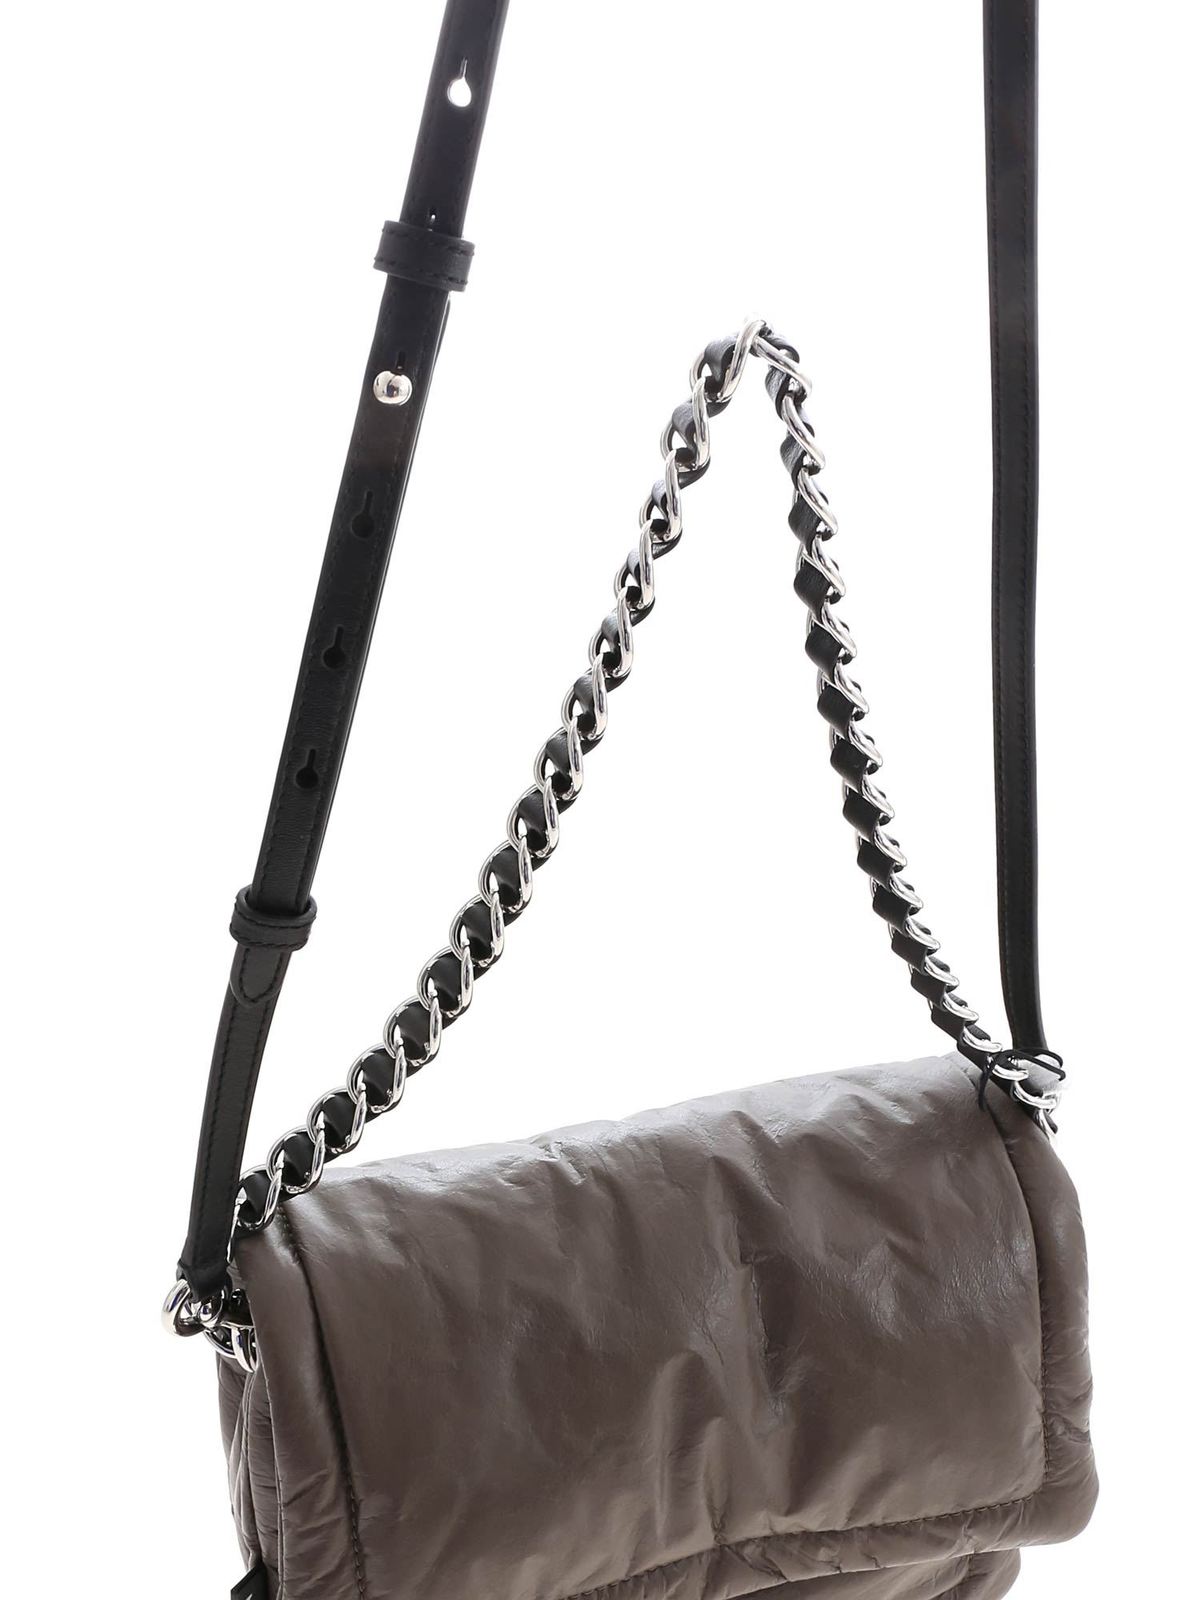 Marc Jacobs - Make it Mini or Metallic - THE Pillow Bag is